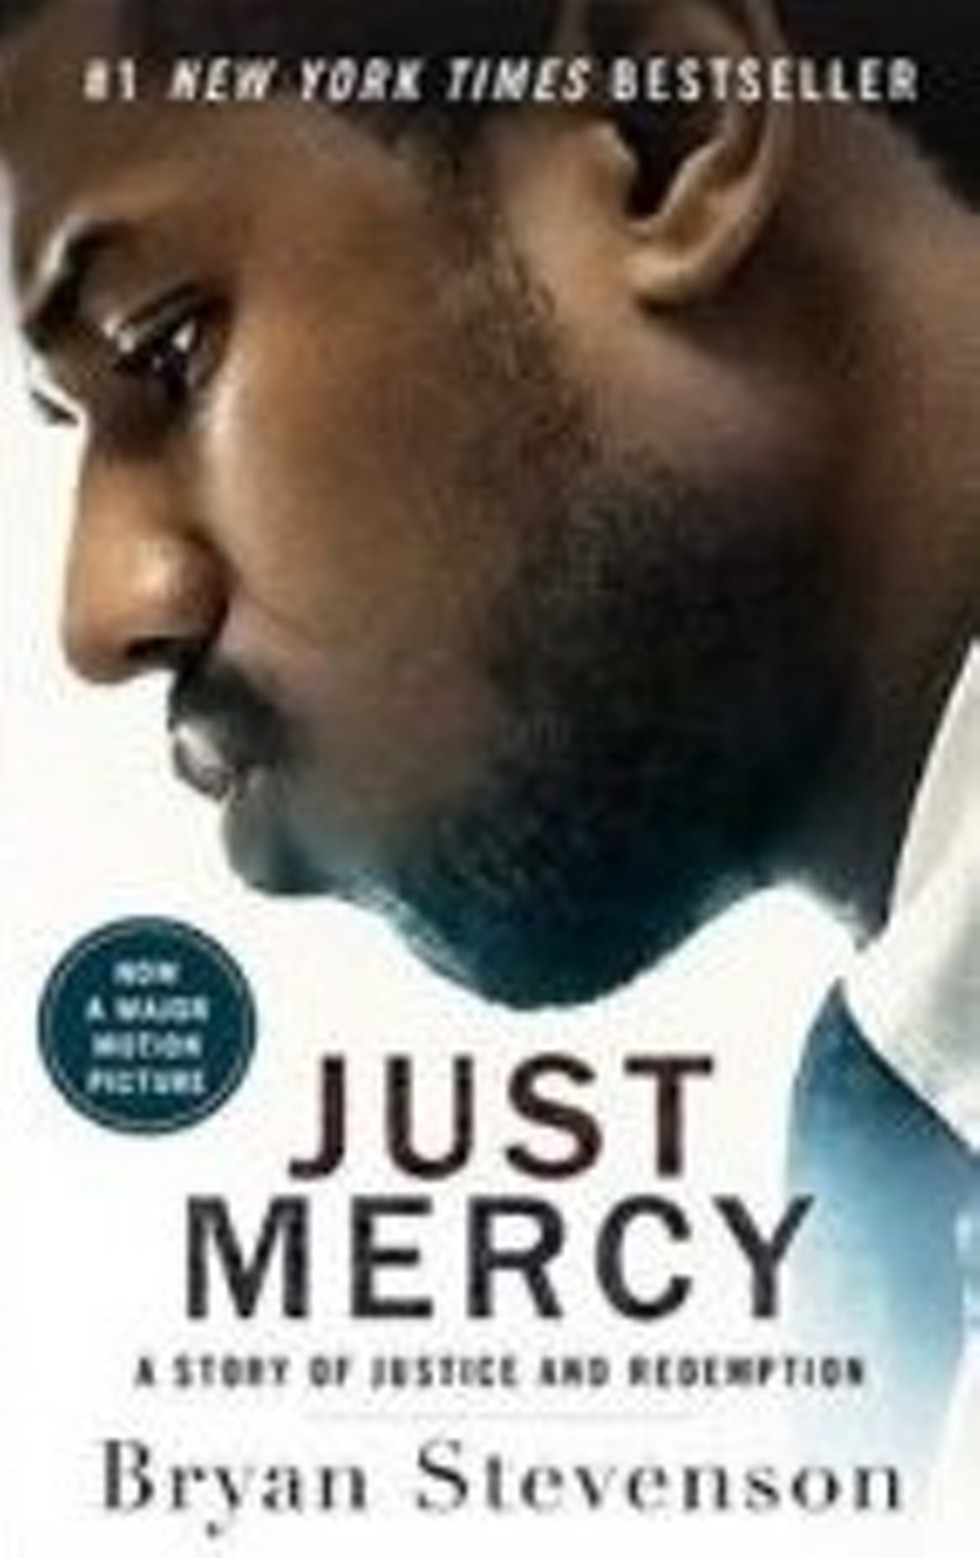 Cover of book, Just Mercy